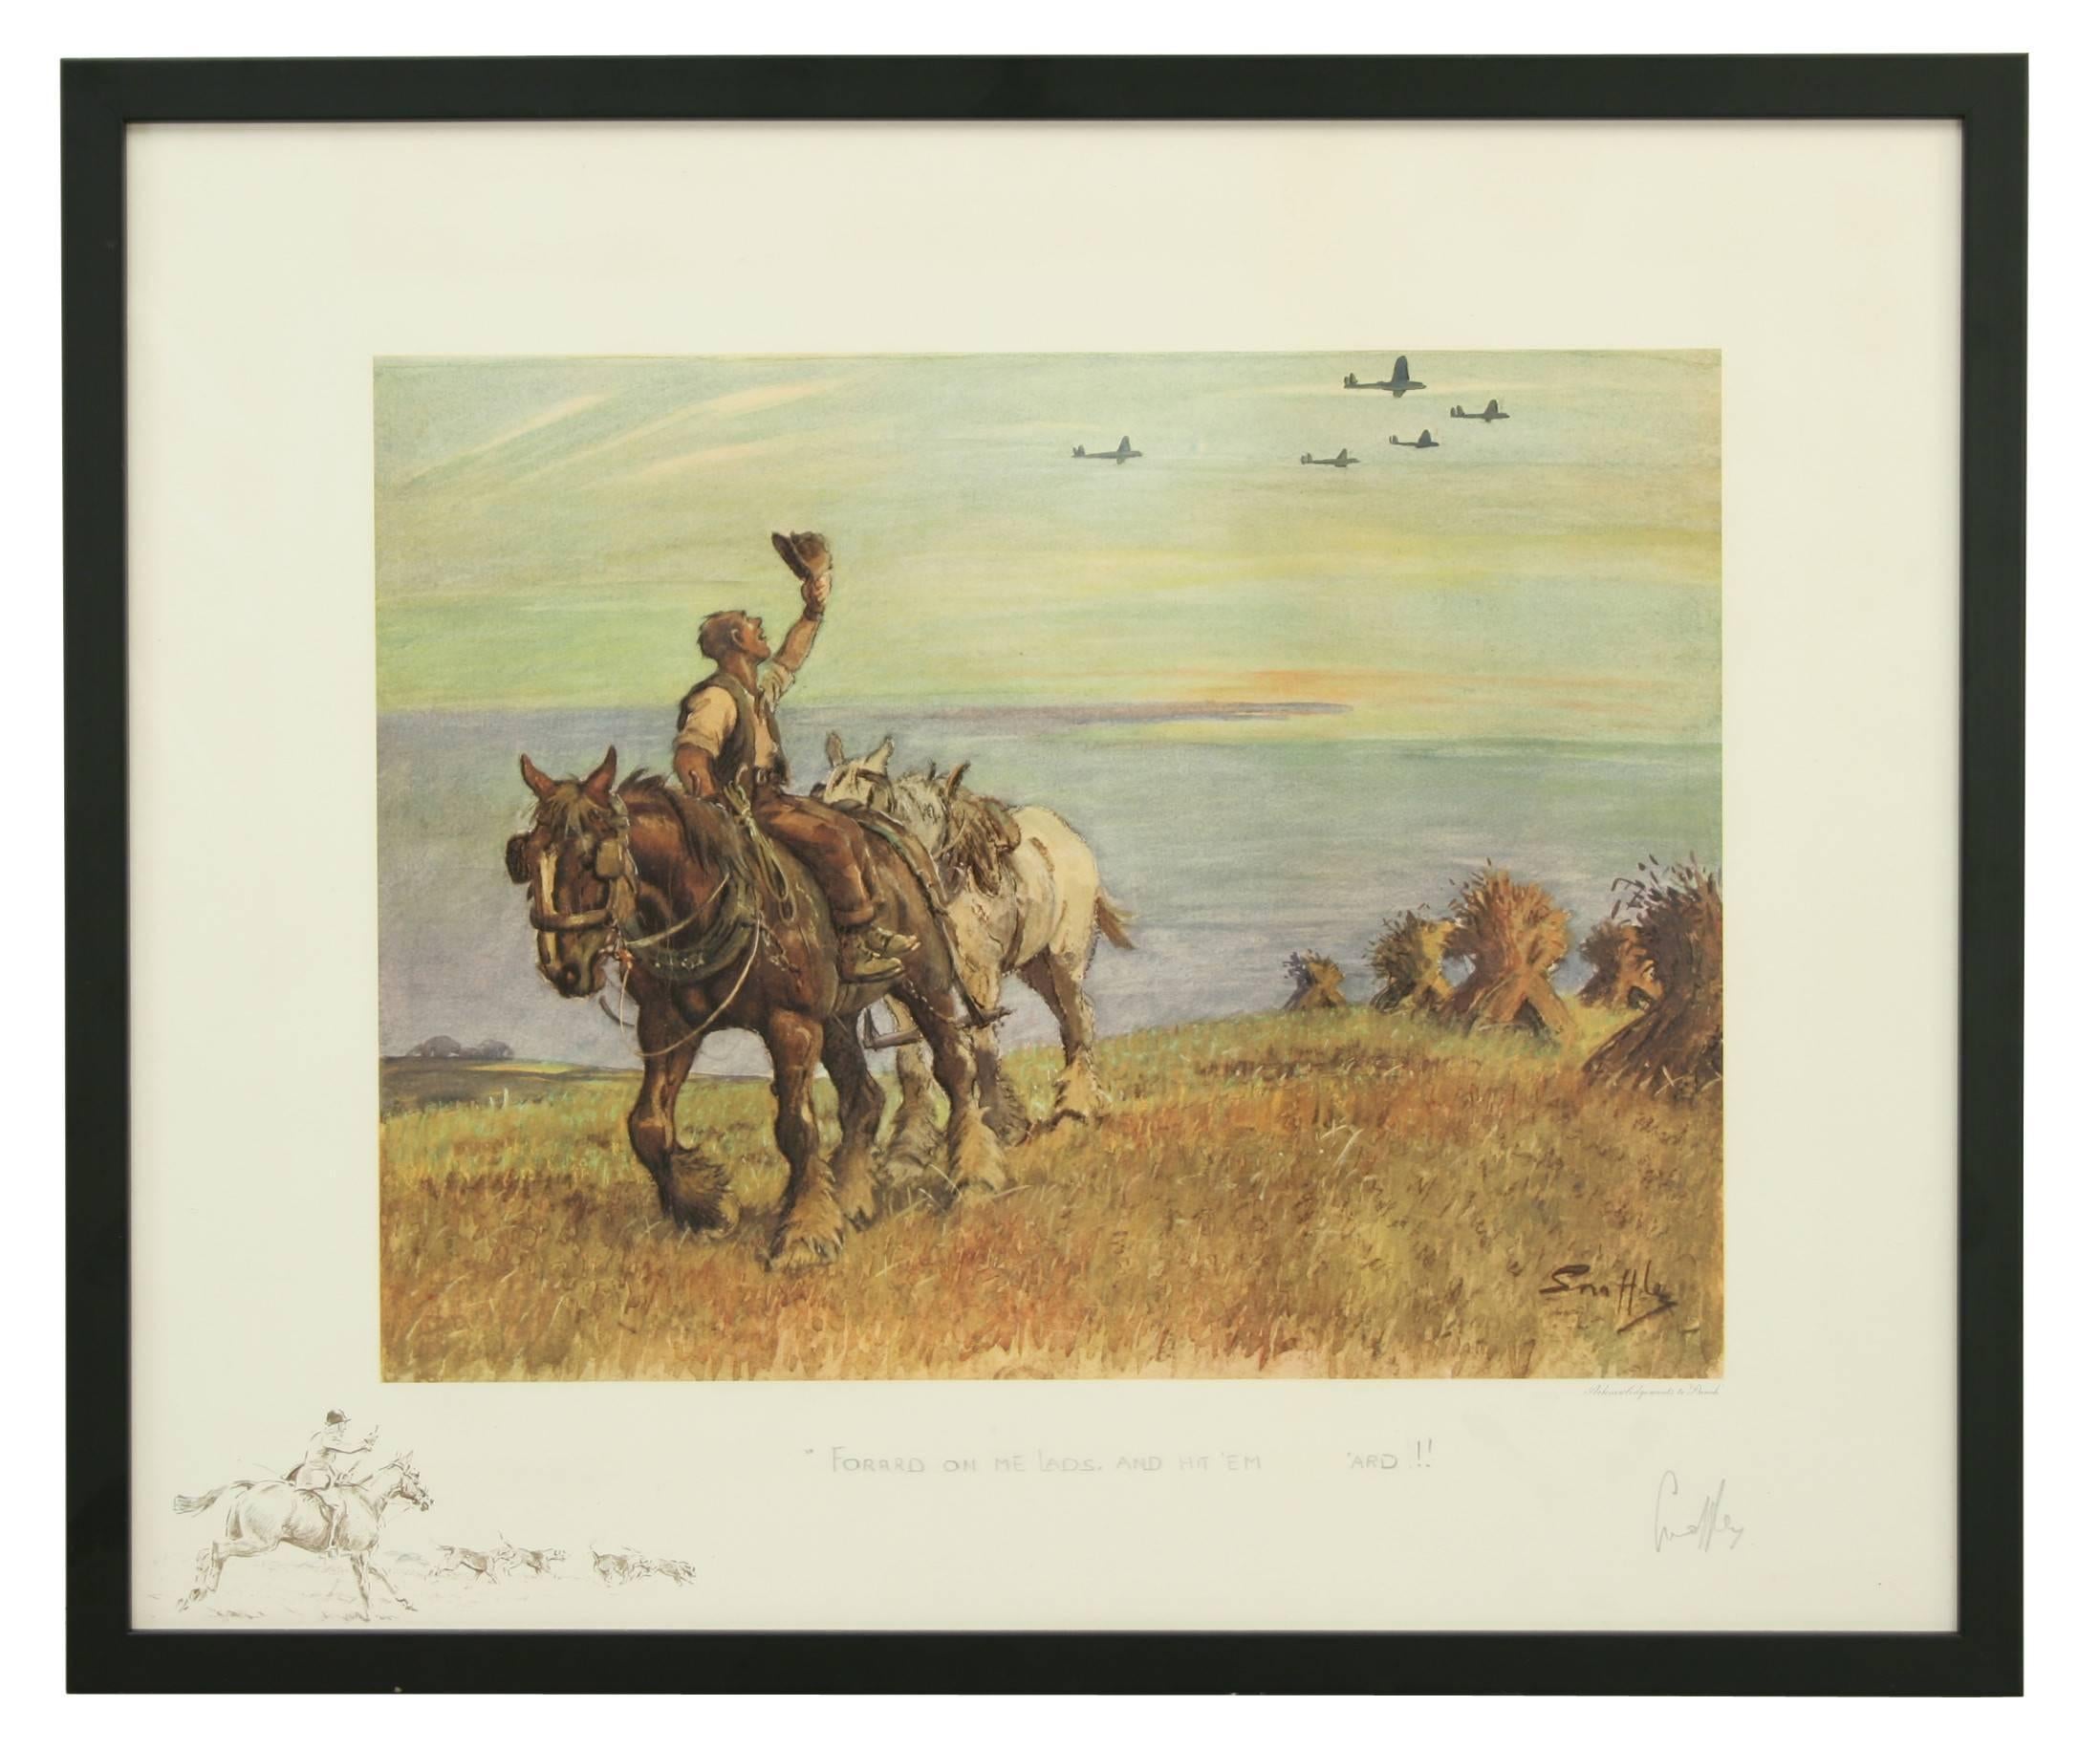 'Forrard on me Lads and hit 'em - ard!'.
WW II military print.
A coloured Snaffles lithograph entitled 'Forrard on me Lads and hit 'em - ard.!!' Showing a farmer in his field with his two horses, waving to a passing squadron of bombers. In the